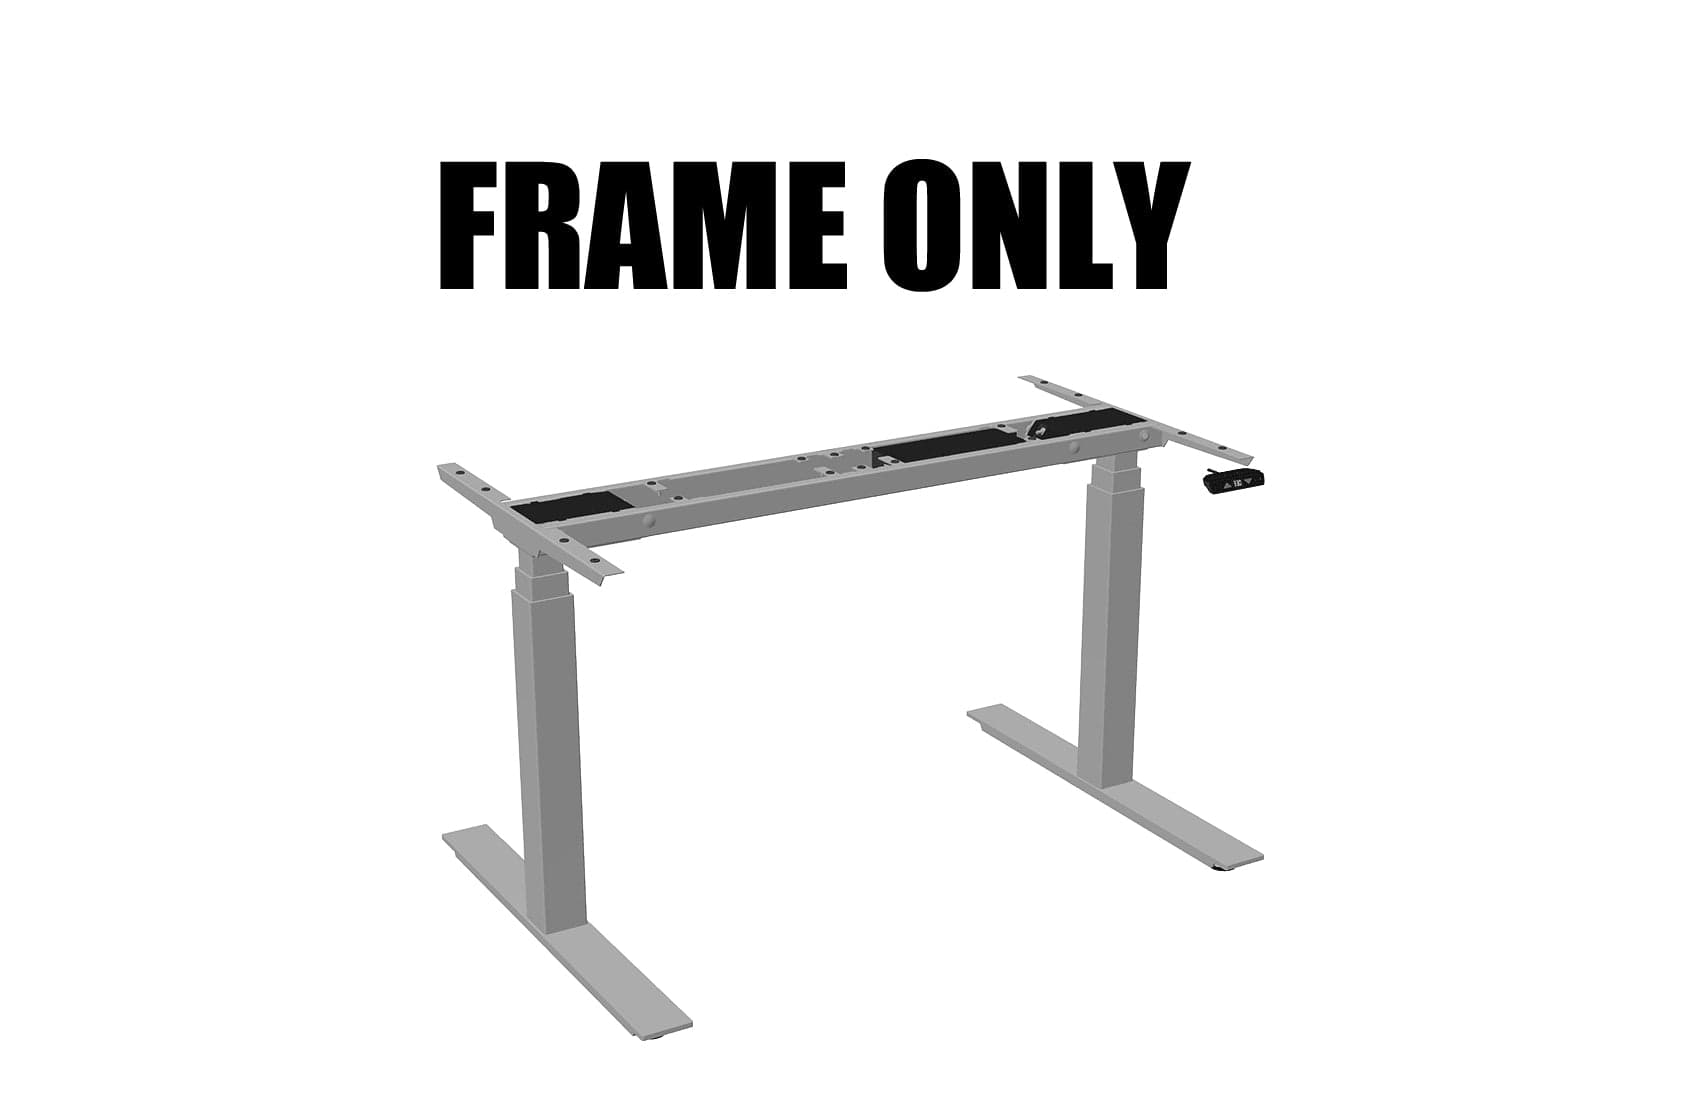 Sit-to-Stand 2-Leg Desk Frame Only: M2